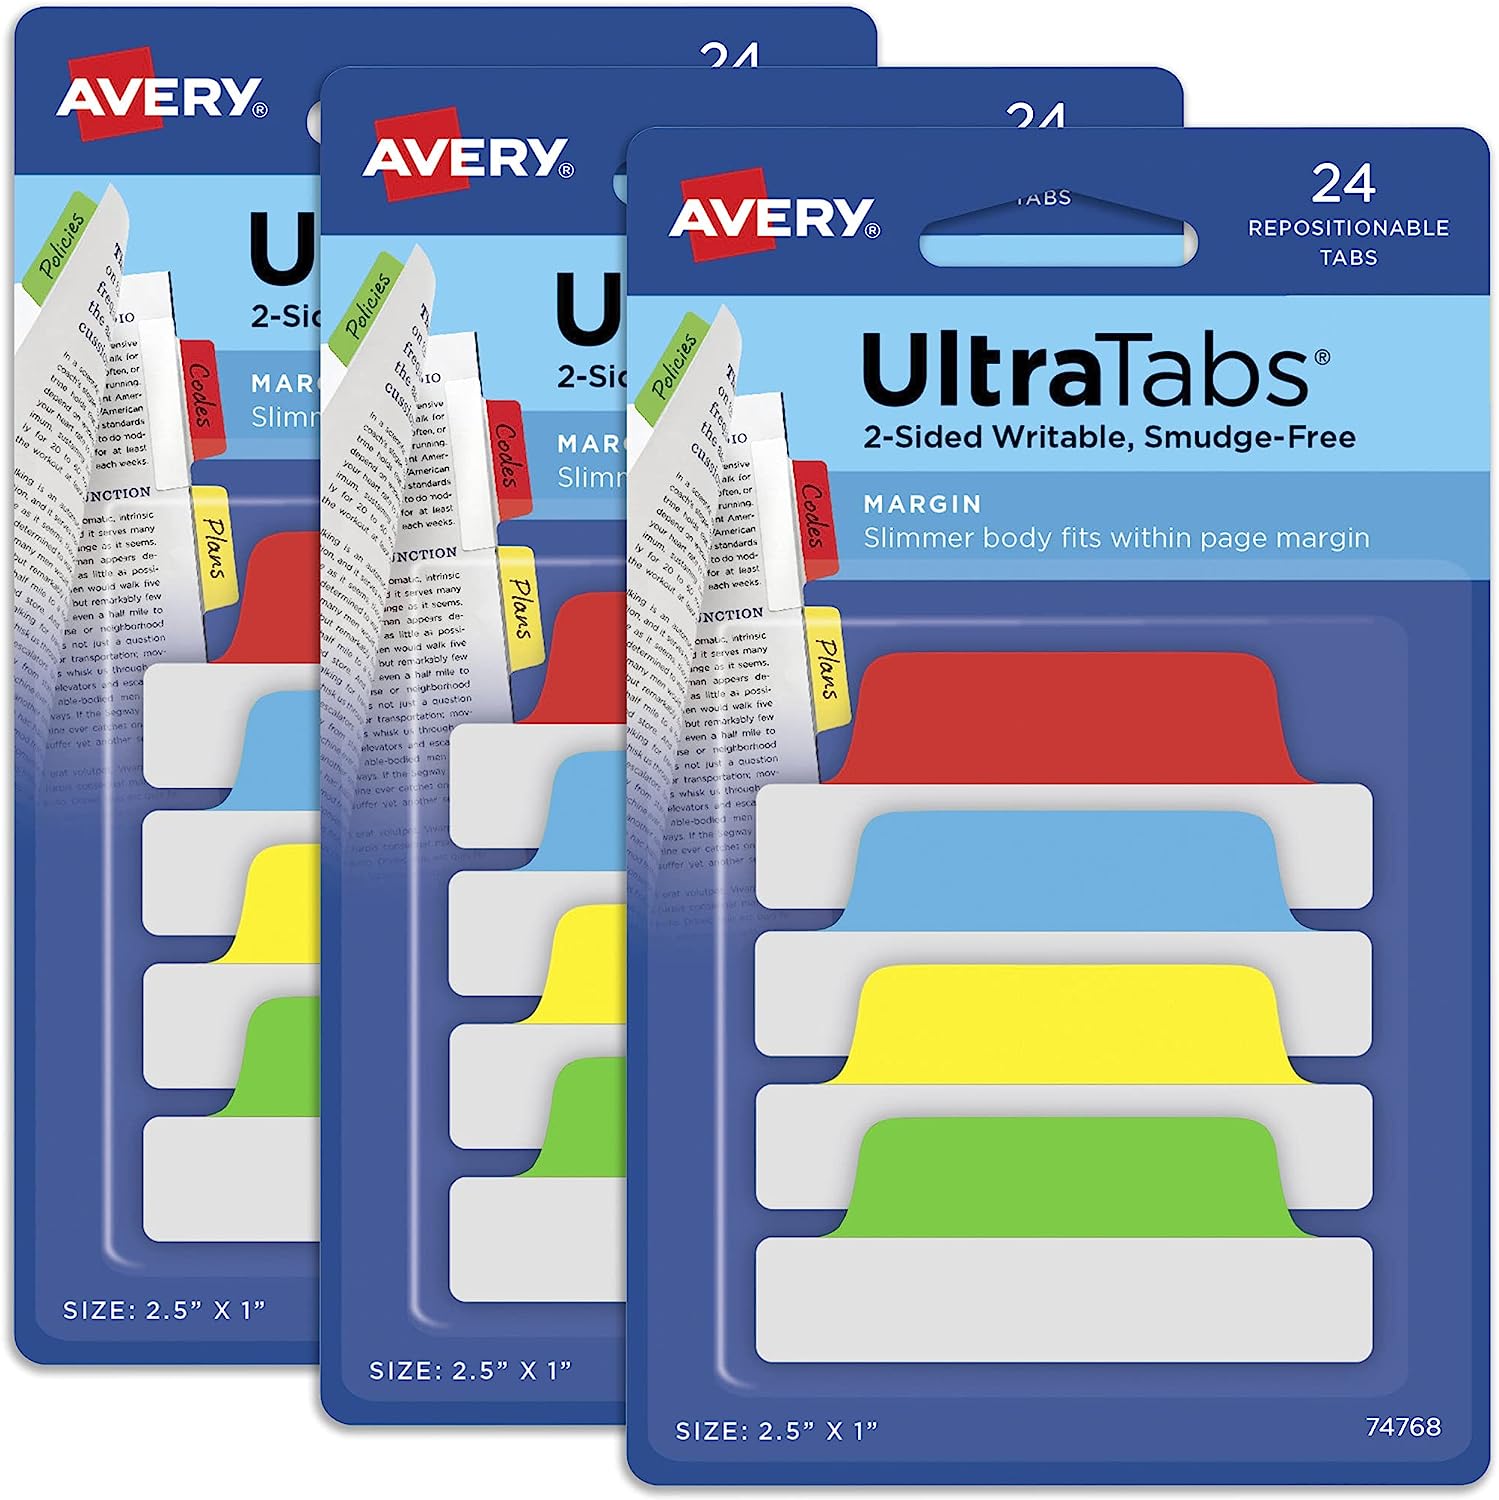 Avery Margin Ultra Tabs, 2.5" x 1", 2-Side Writable, Assorted Colors, 24 Repositionable Page Tabs (74768)